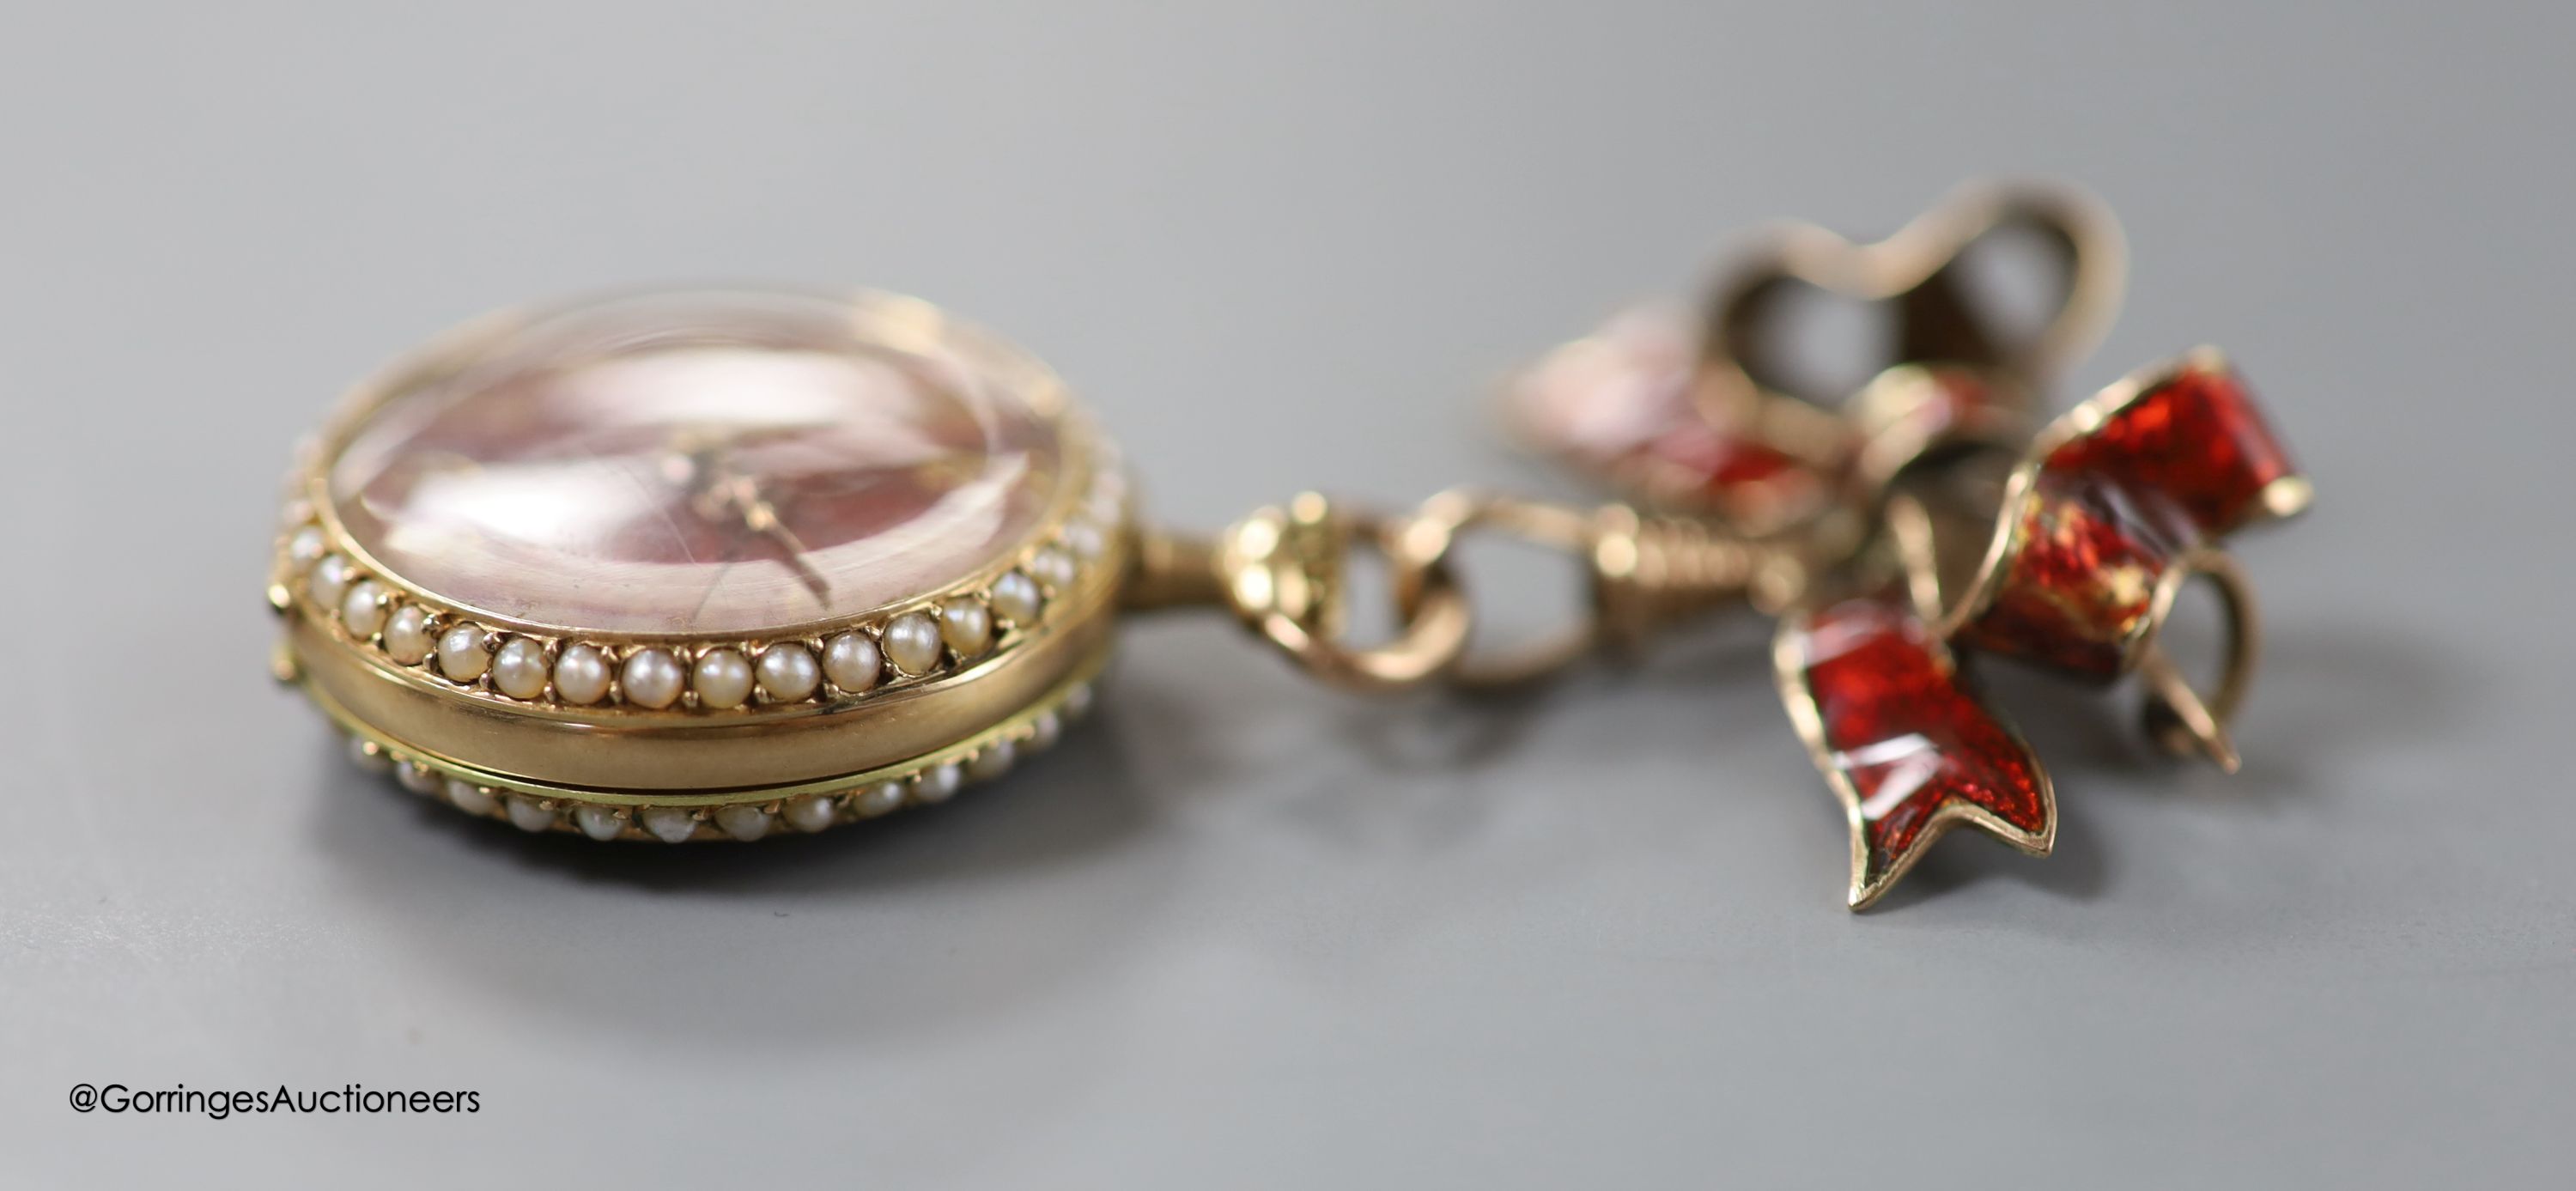 A lady's early 20th century 14k yellow metal, red enamel and seed pearl set fob watch(a.f.), case diameter 26mm, gross 15.5 grams, on a 9ct and red enamel bow brooch, gross 4.6 grams.